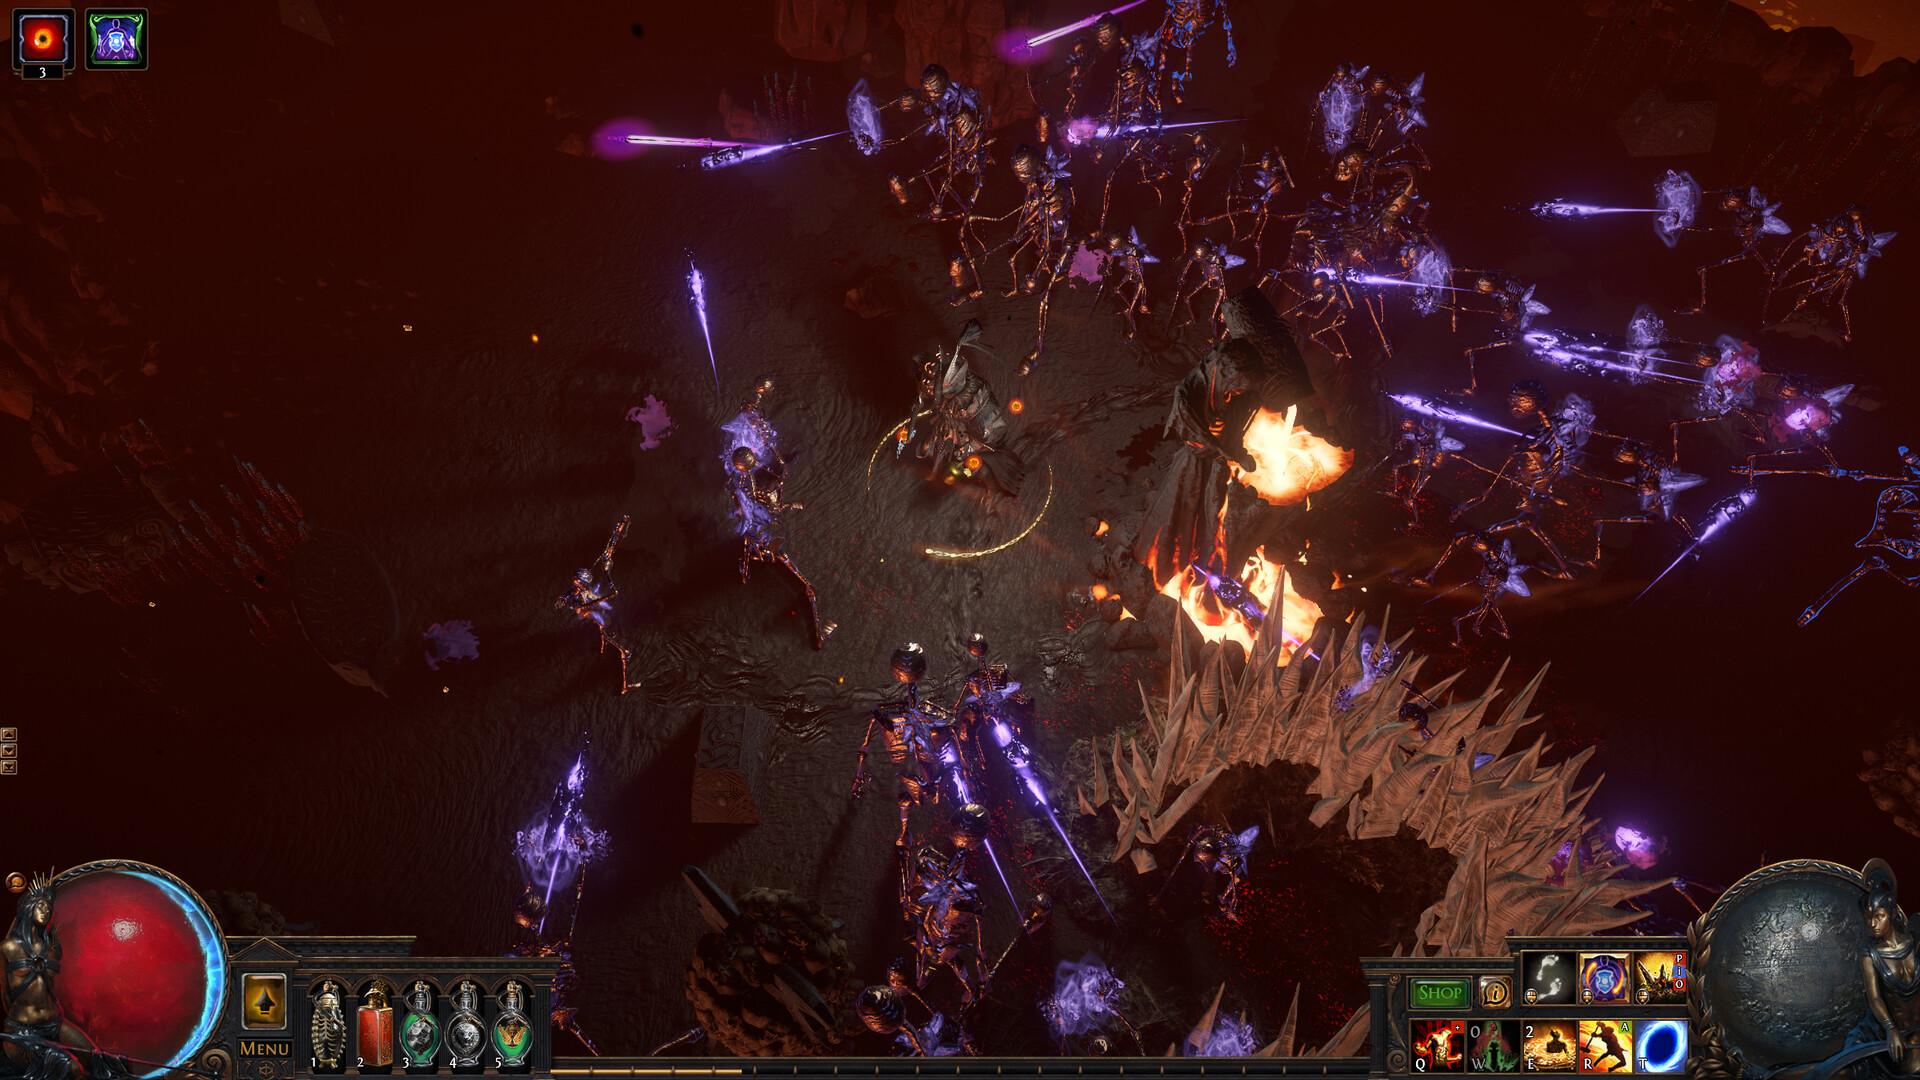 Screenshot №1 from game Path of Exile